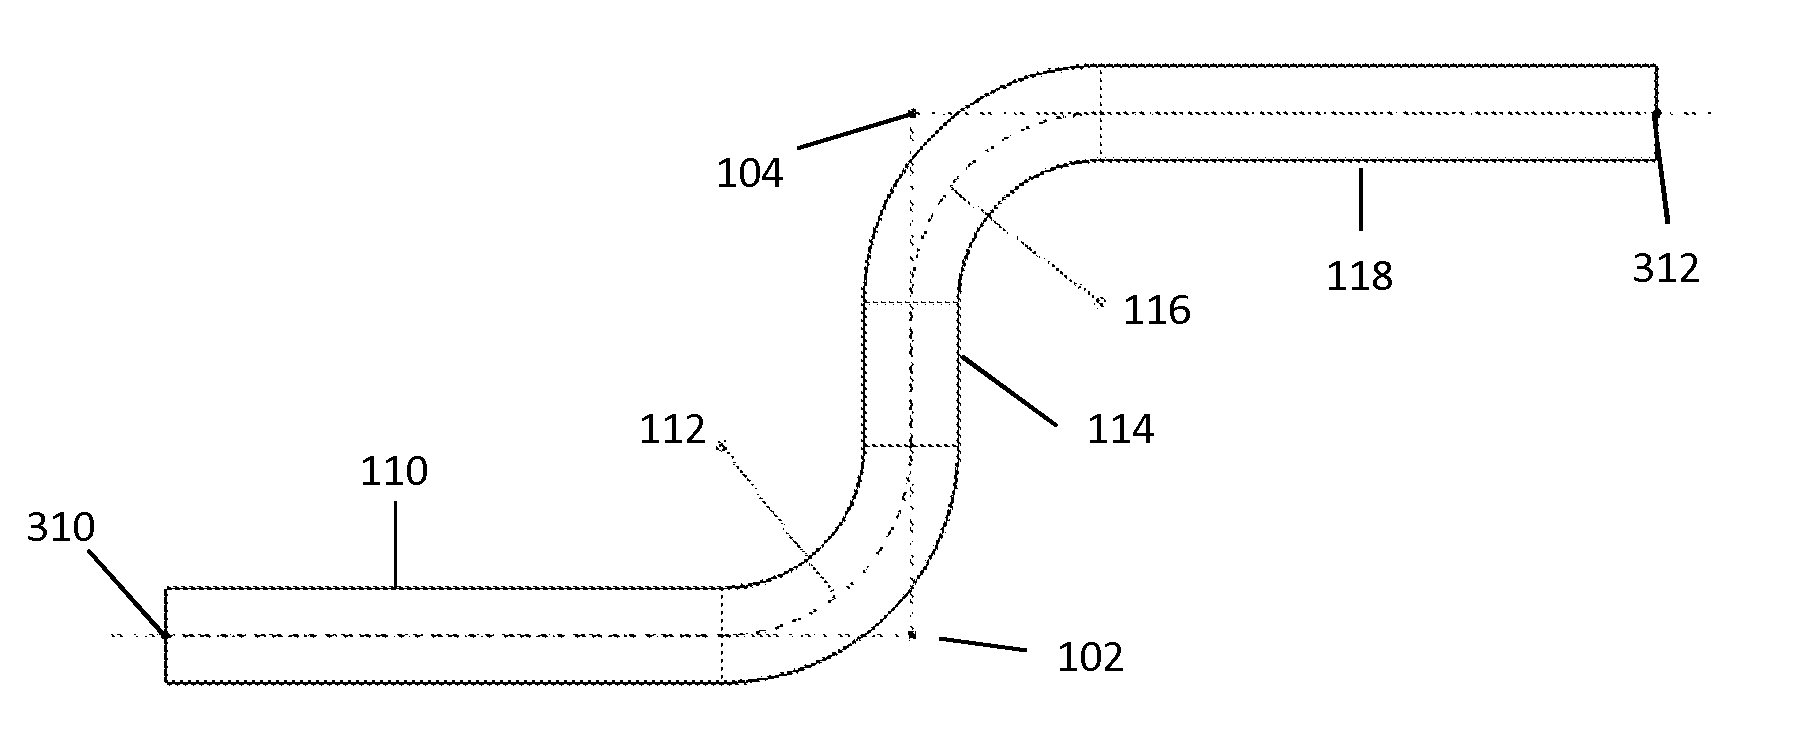 Design of a path connecting a first point to a second point in a three-dimensional scene